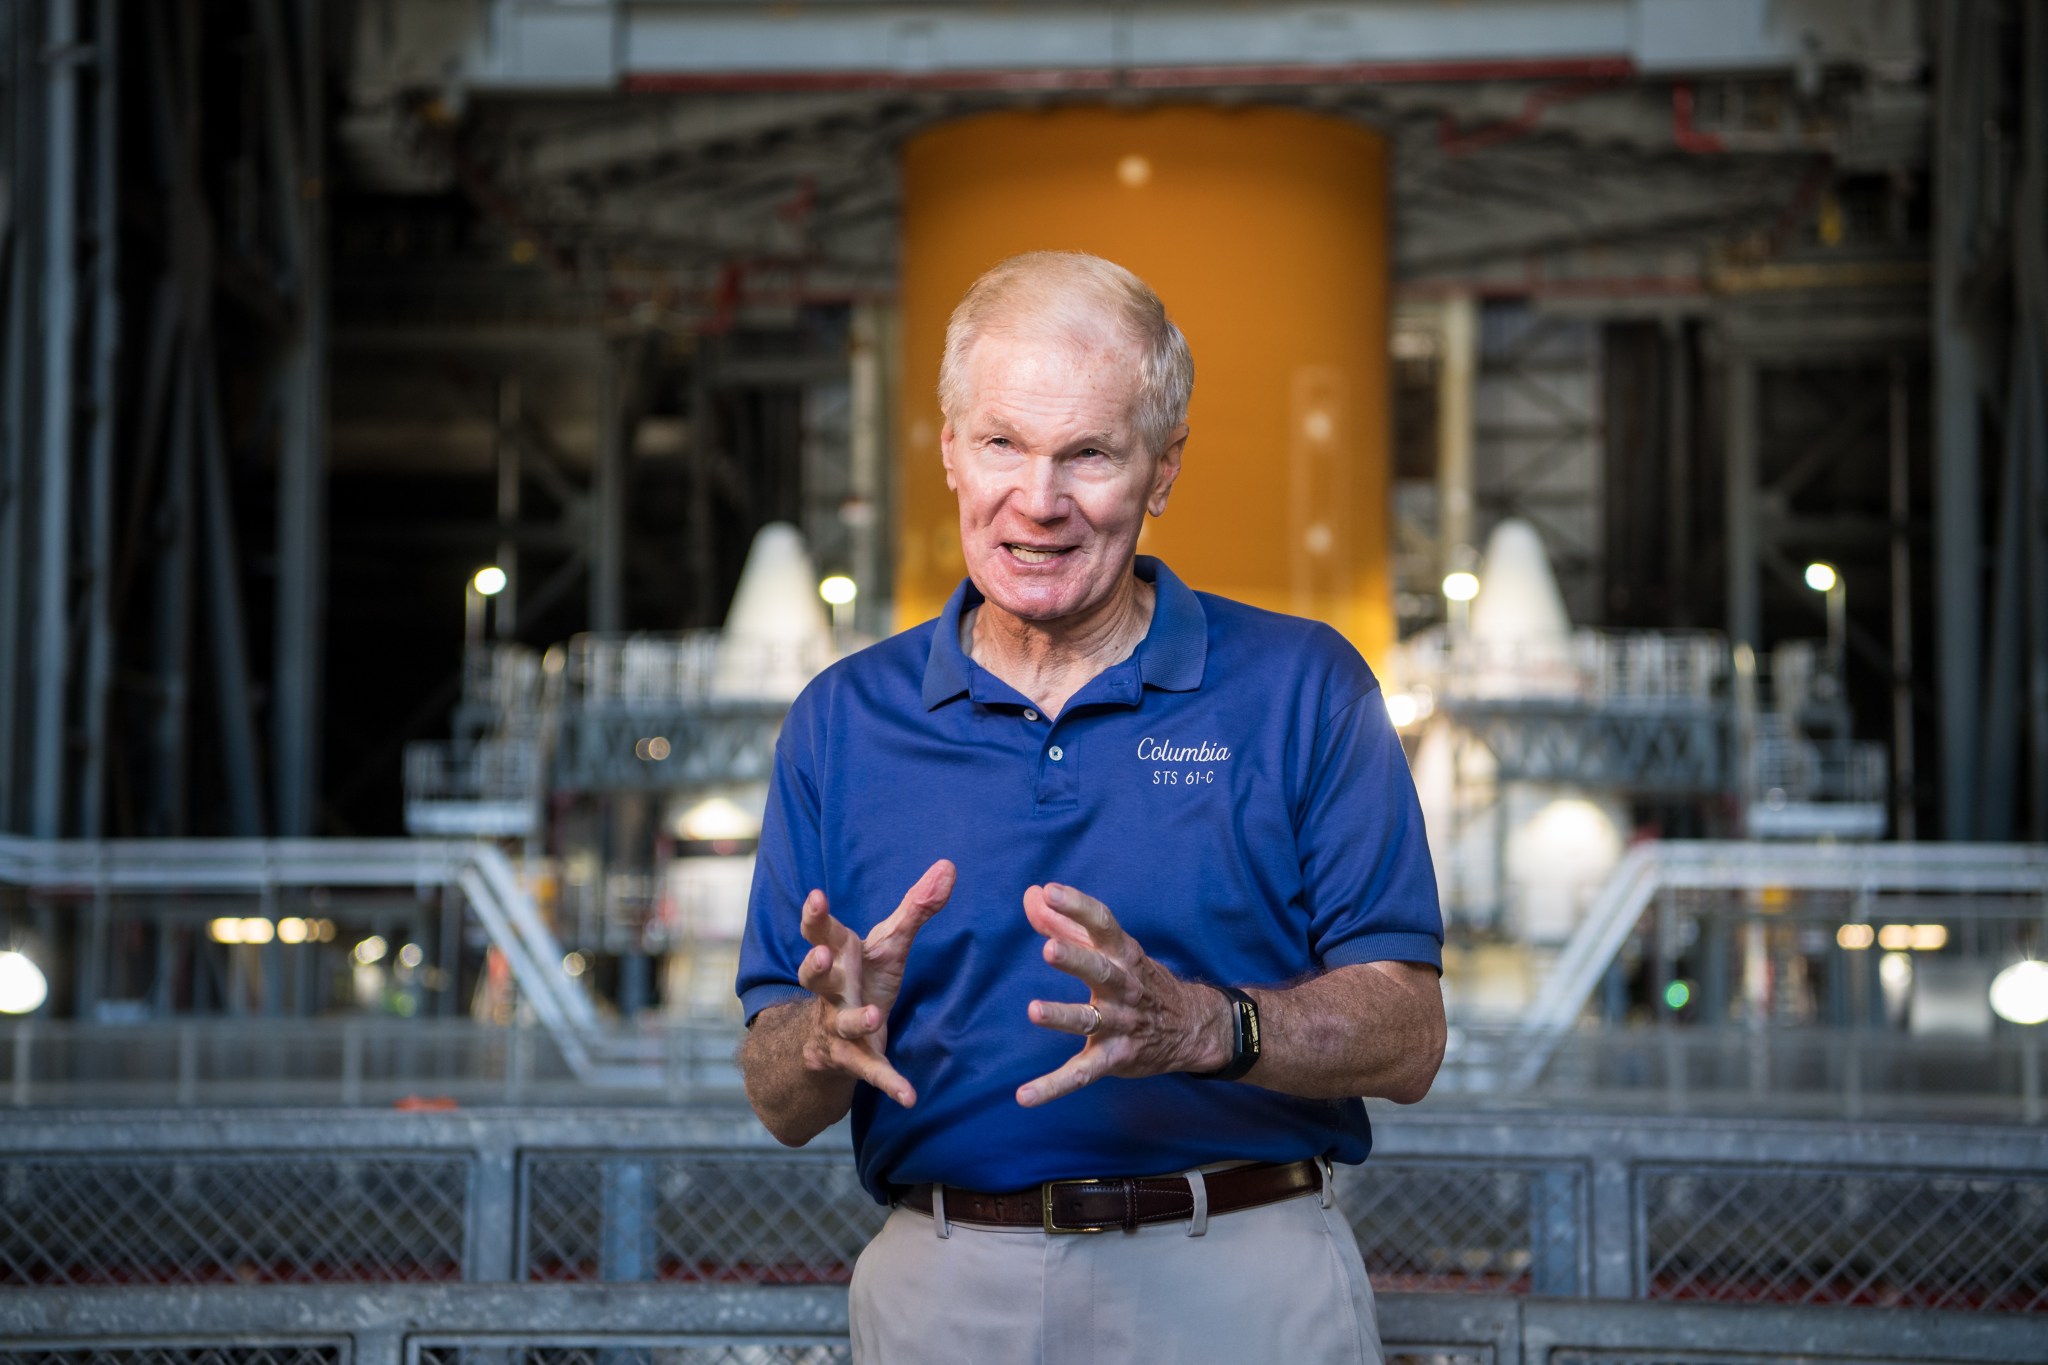 NASA Administrator Bill Nelson is interviewed during a tour of the Vehicle Assembly Building Wednesday, July 28, 2021, at NASA’s Kennedy Space Center in Florida.